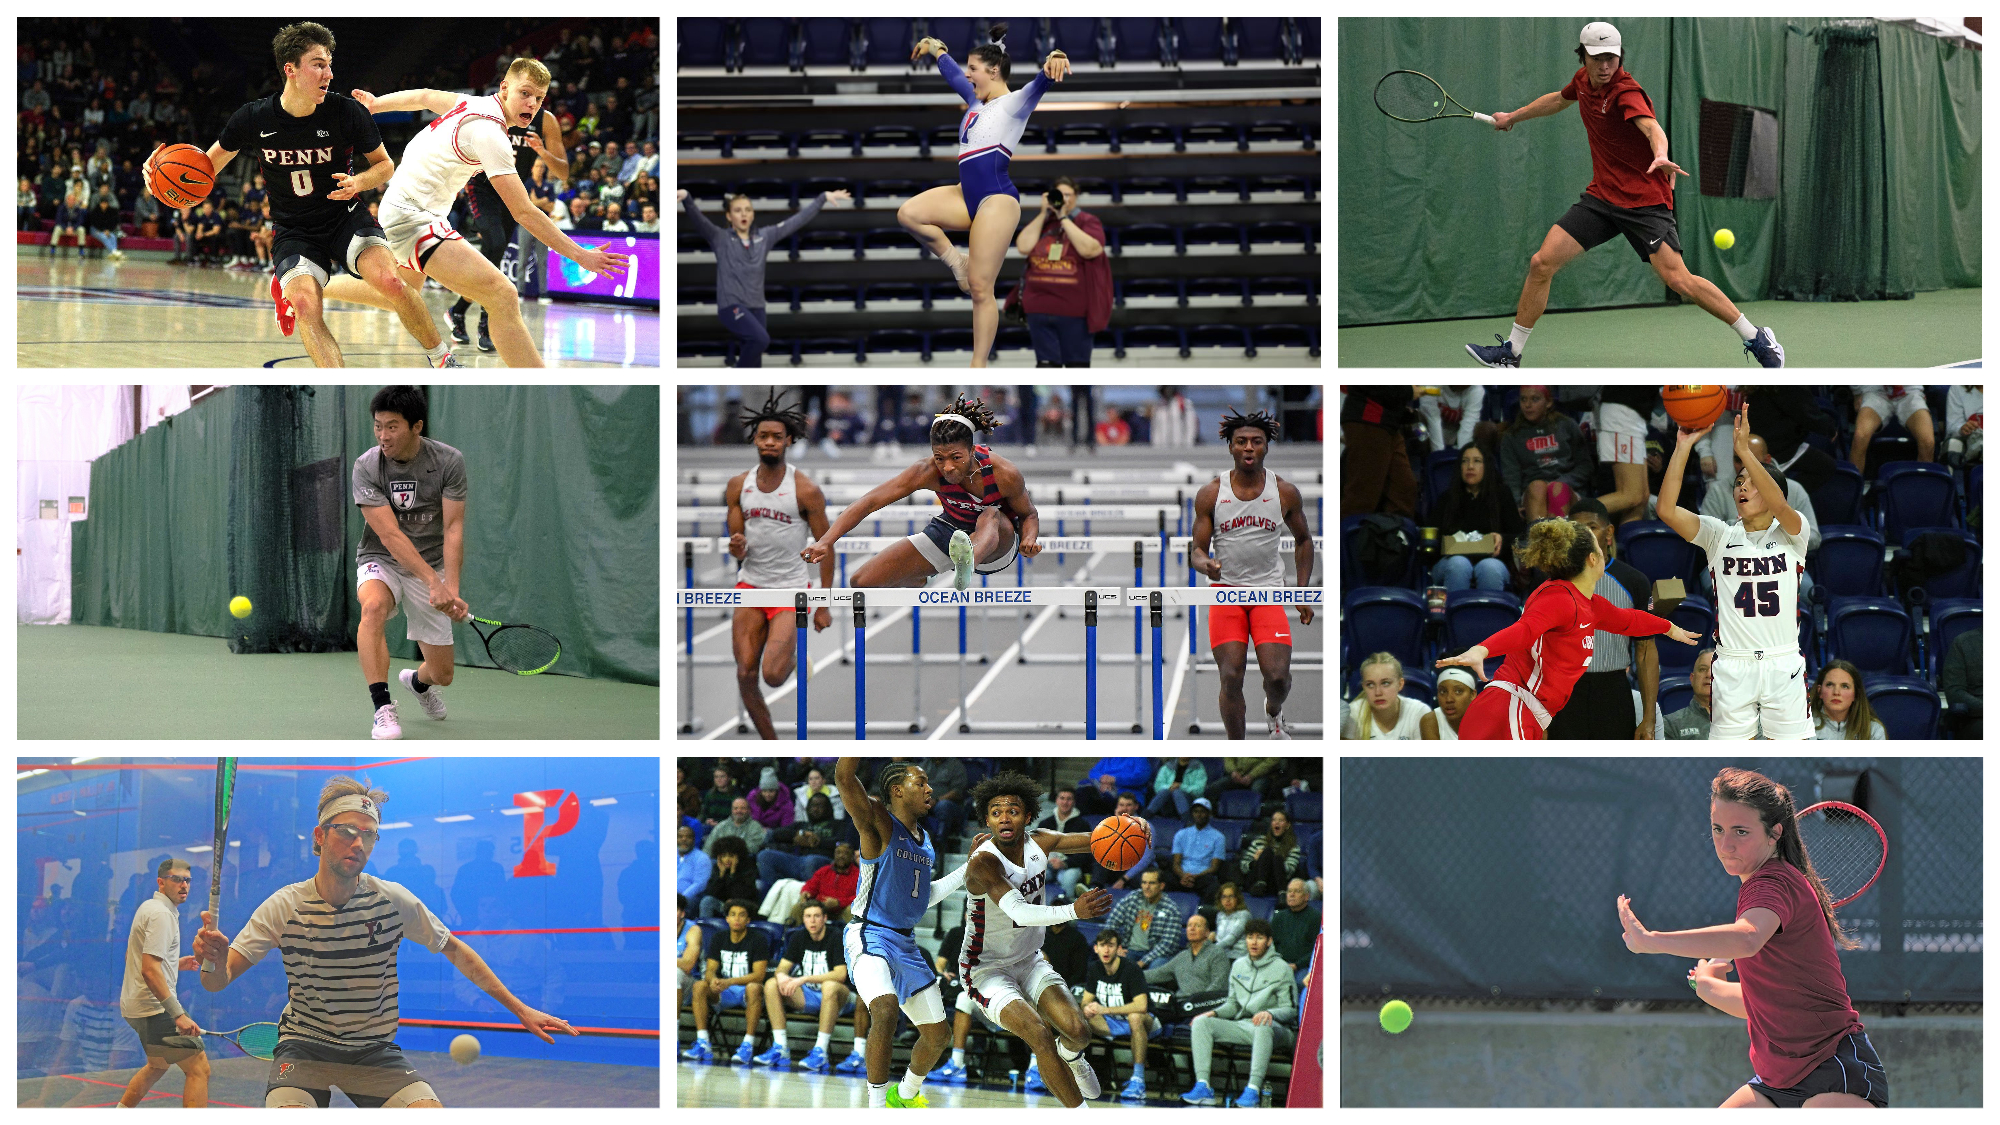 A grid of action shots of Penn's athletes competing in basketball, gymnastics, tennis, track and field, and squash.